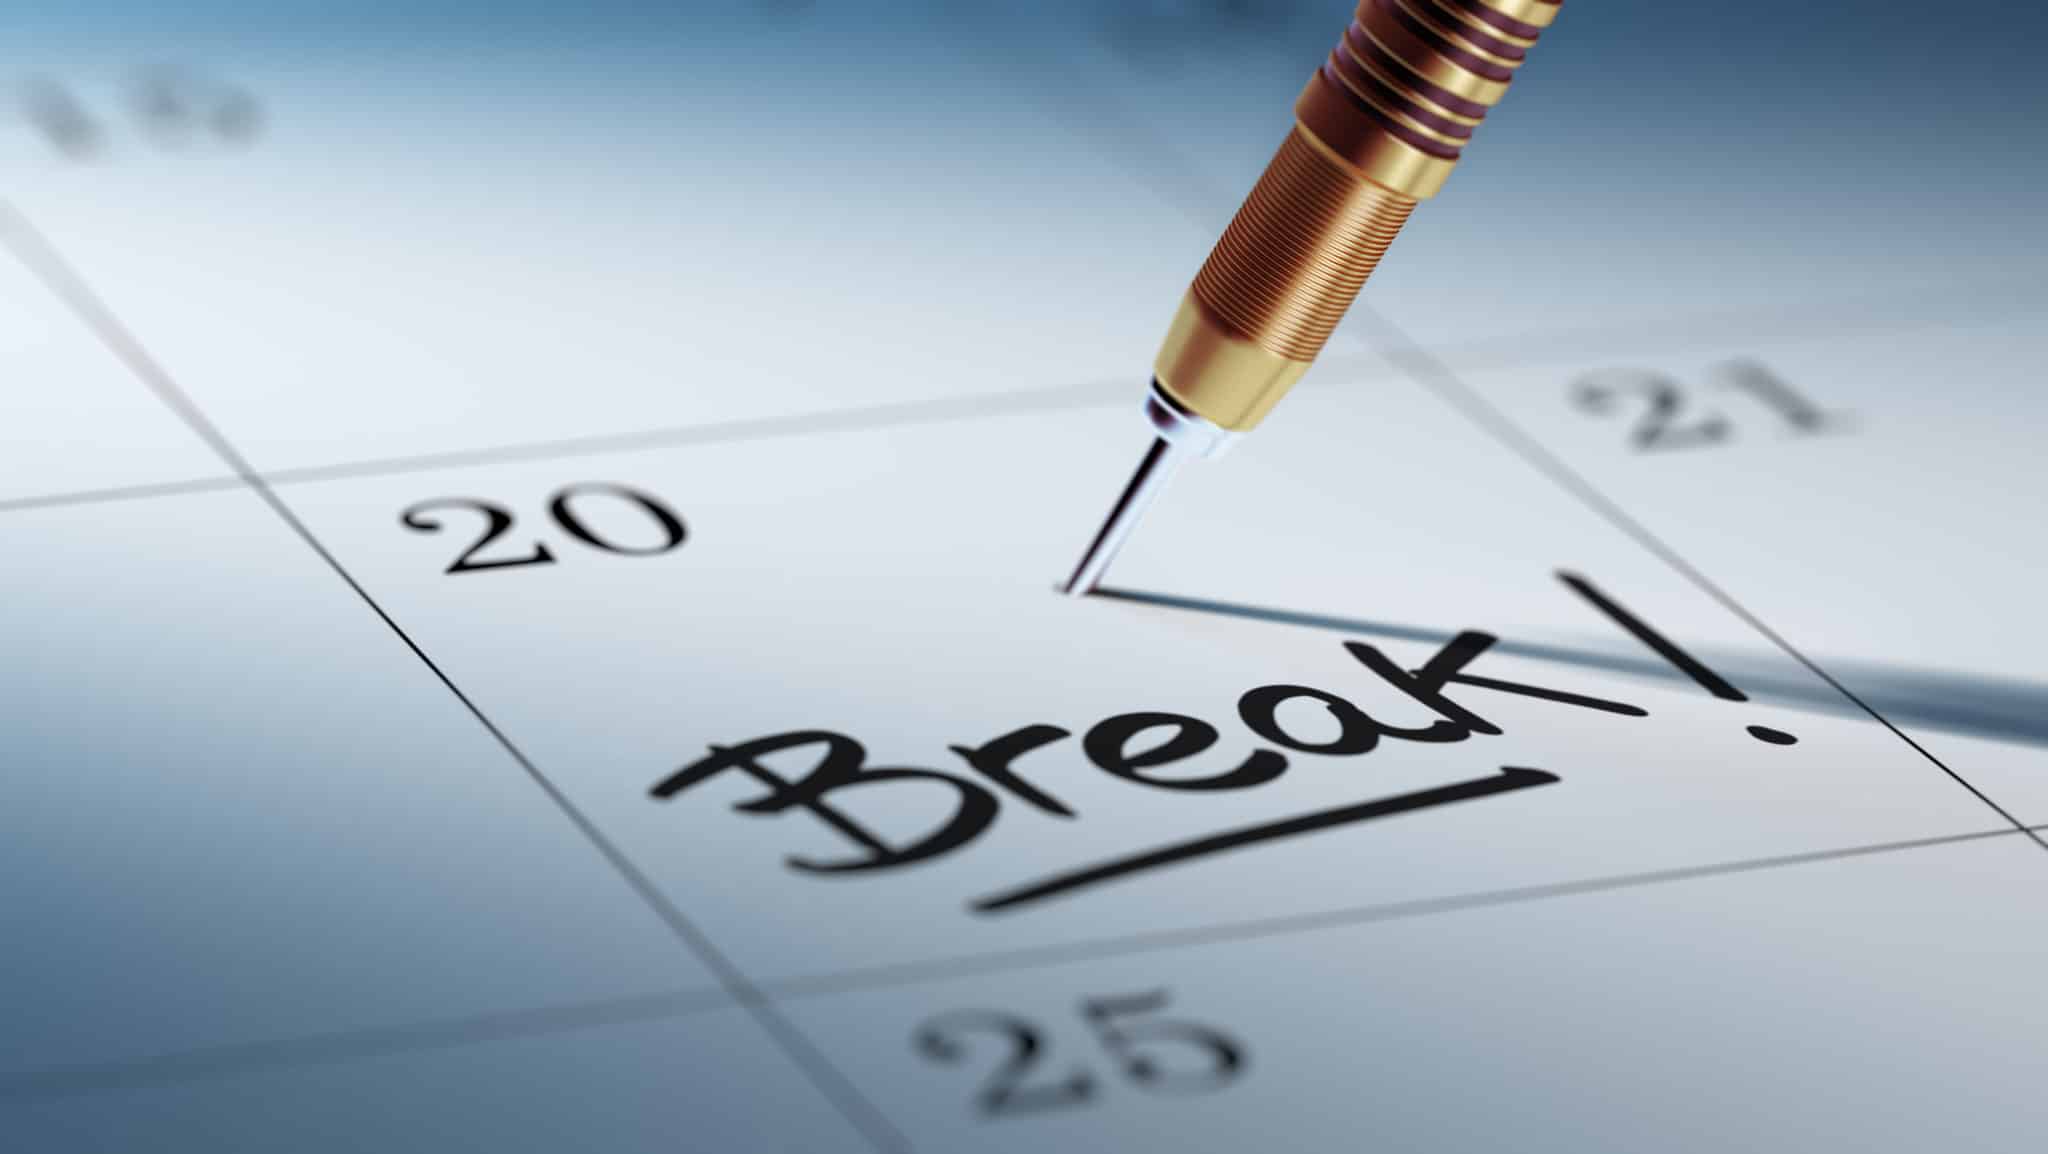 Calendar view with text "break" to take a rest day